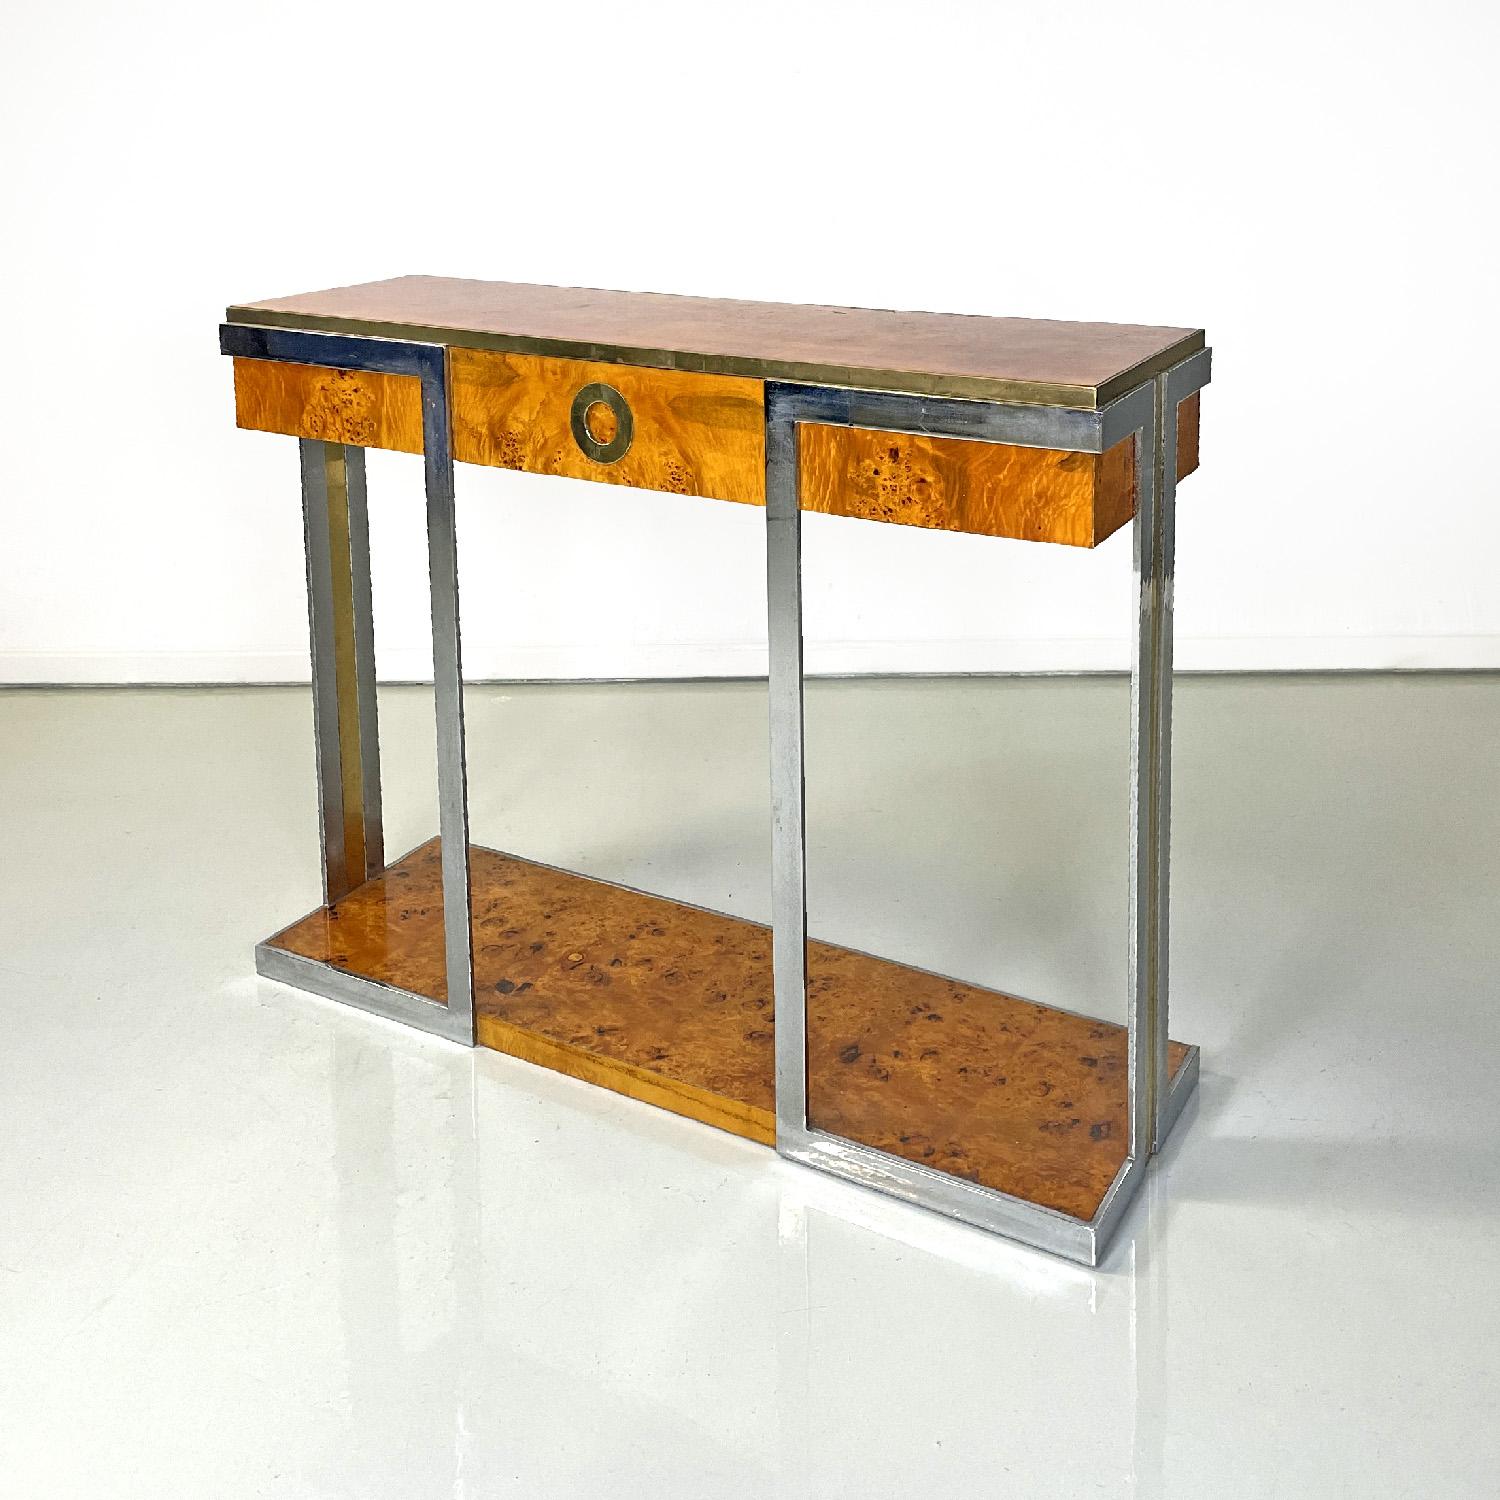 Italian modern briar and chromed metal console by D.I.D., 1980s
Console with two rectangular briar tops. The profile of the upper shelf is given by a golden metal strip, it has a drawer with a round hole that acts as a handle covered in the same